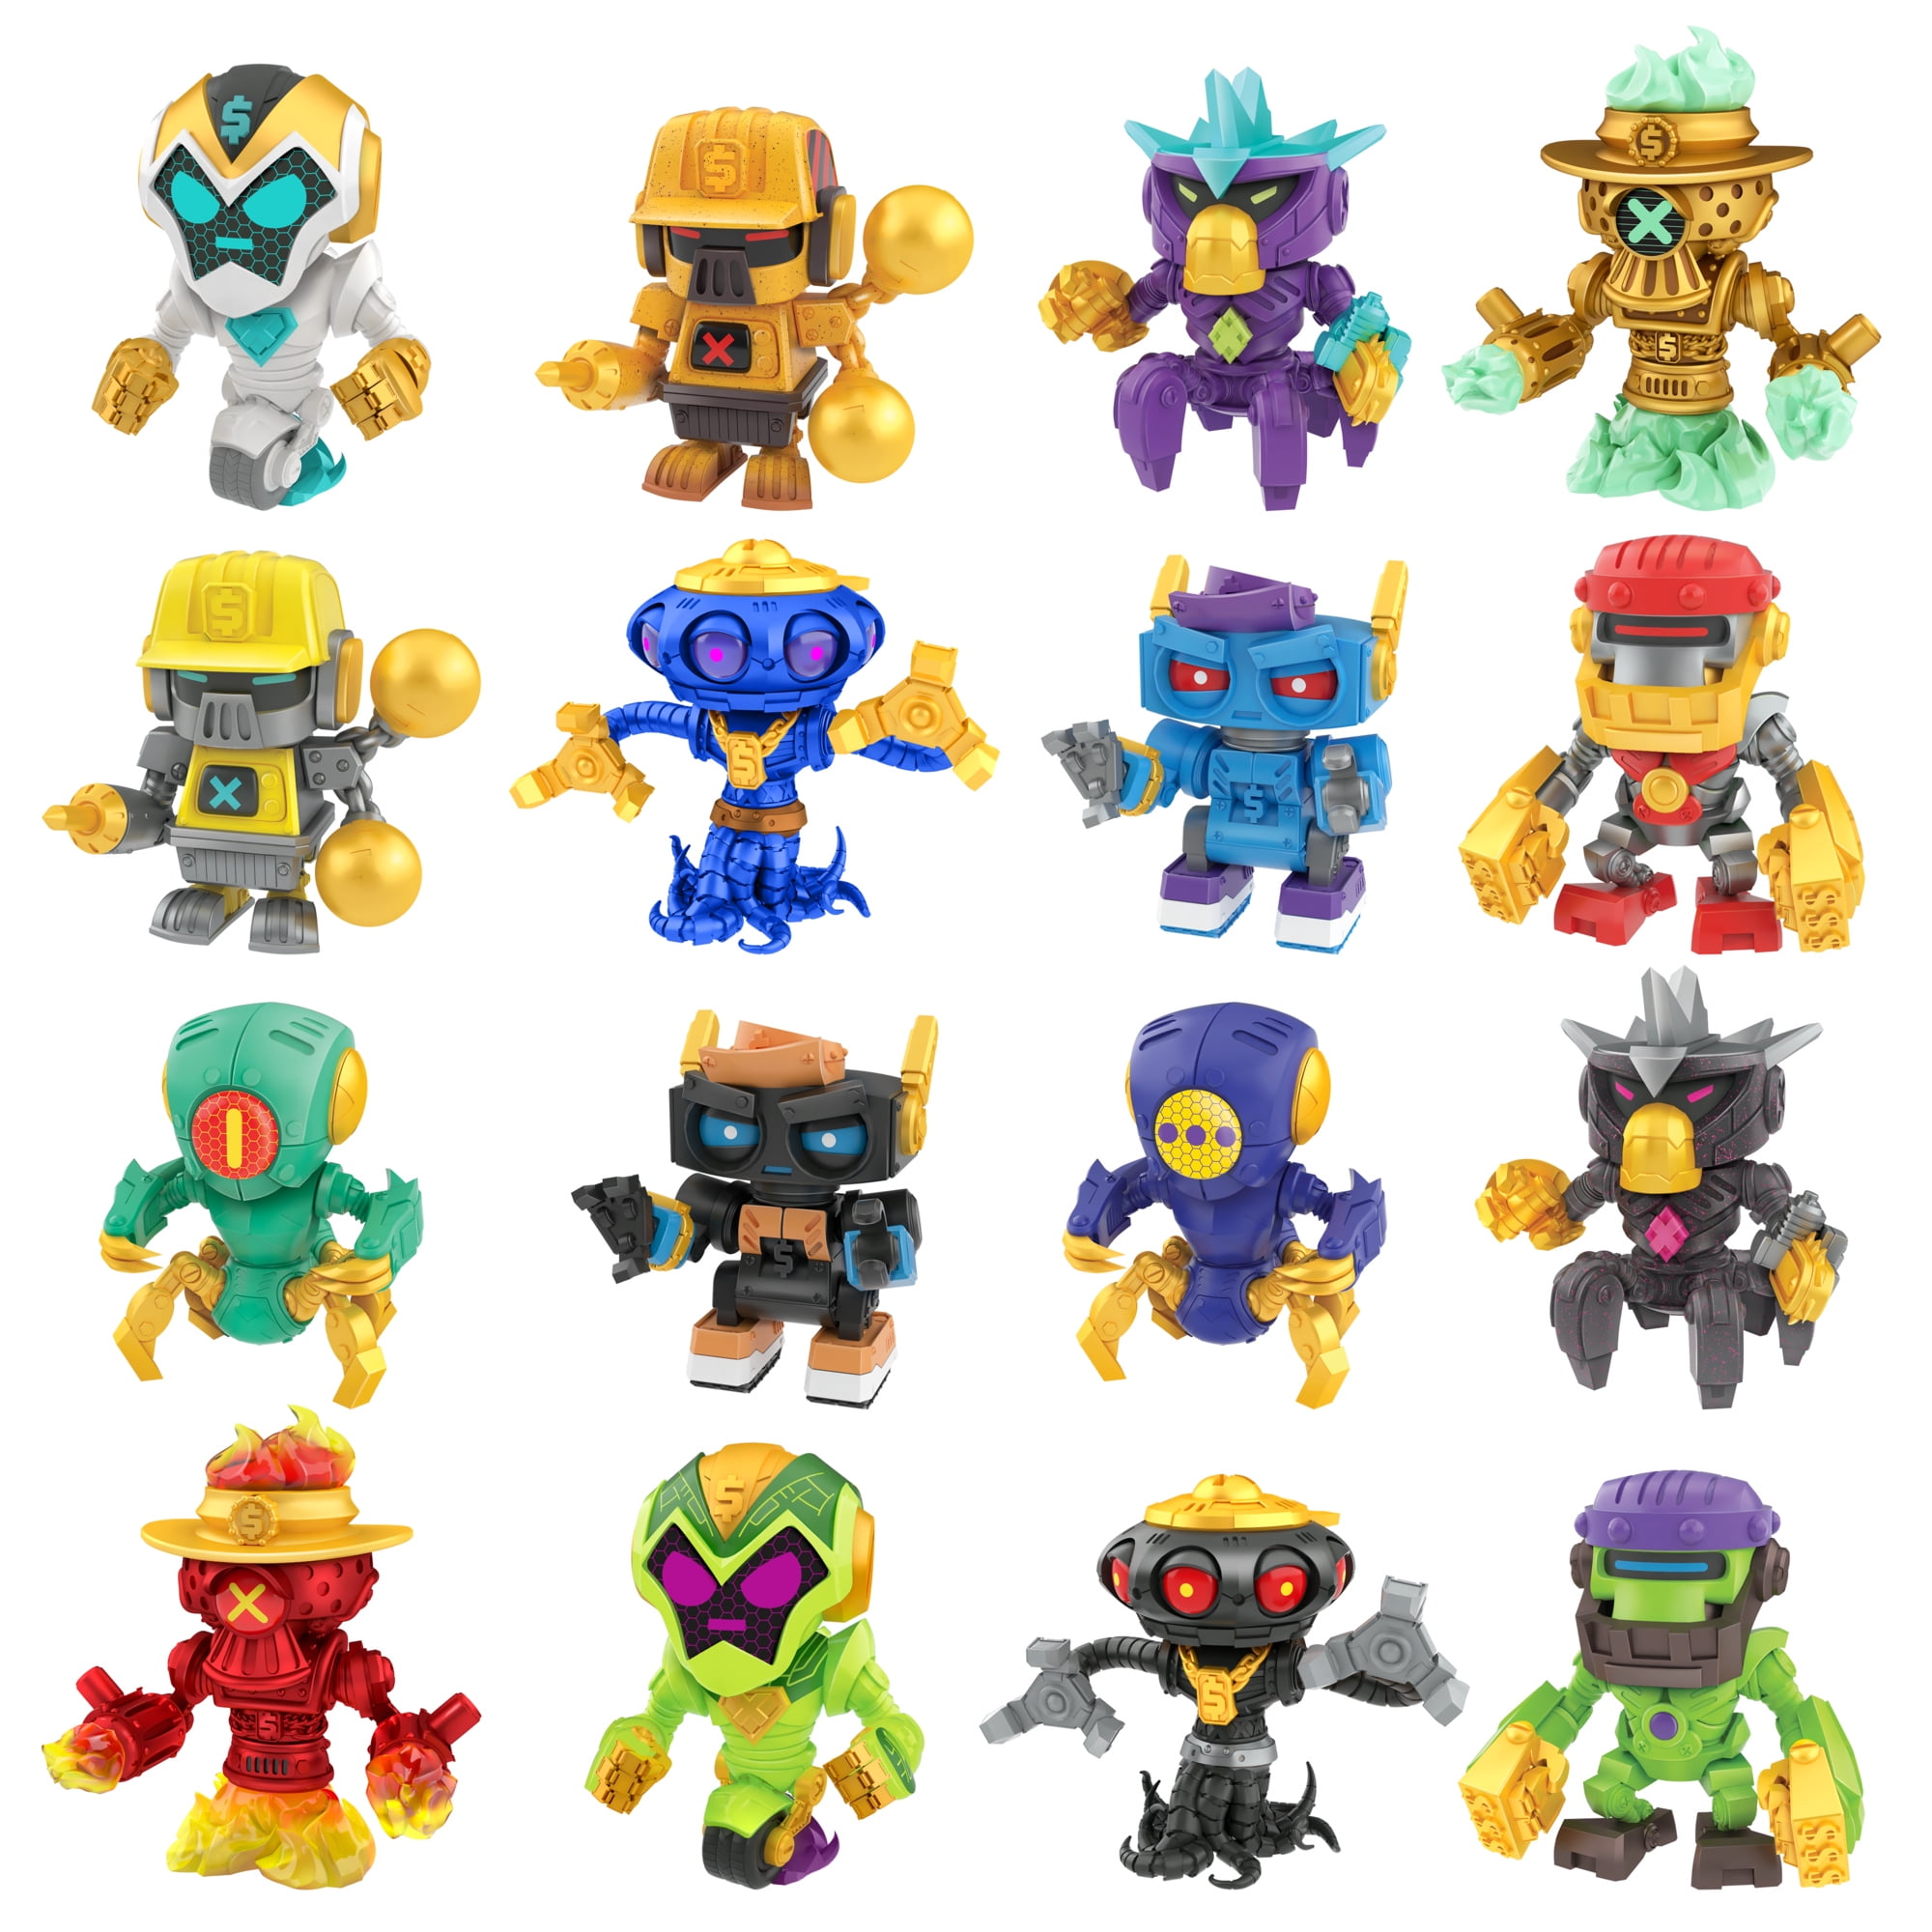 Treasure X Robots Gold - Mini Robots To Discover. Remove The Rust, Build Your Bot, 16 To Collect. Will You Find Real Gold Dipped Treasure?, Boys, Toys For Kids, Ages 5+, Colors And Styles May Vary